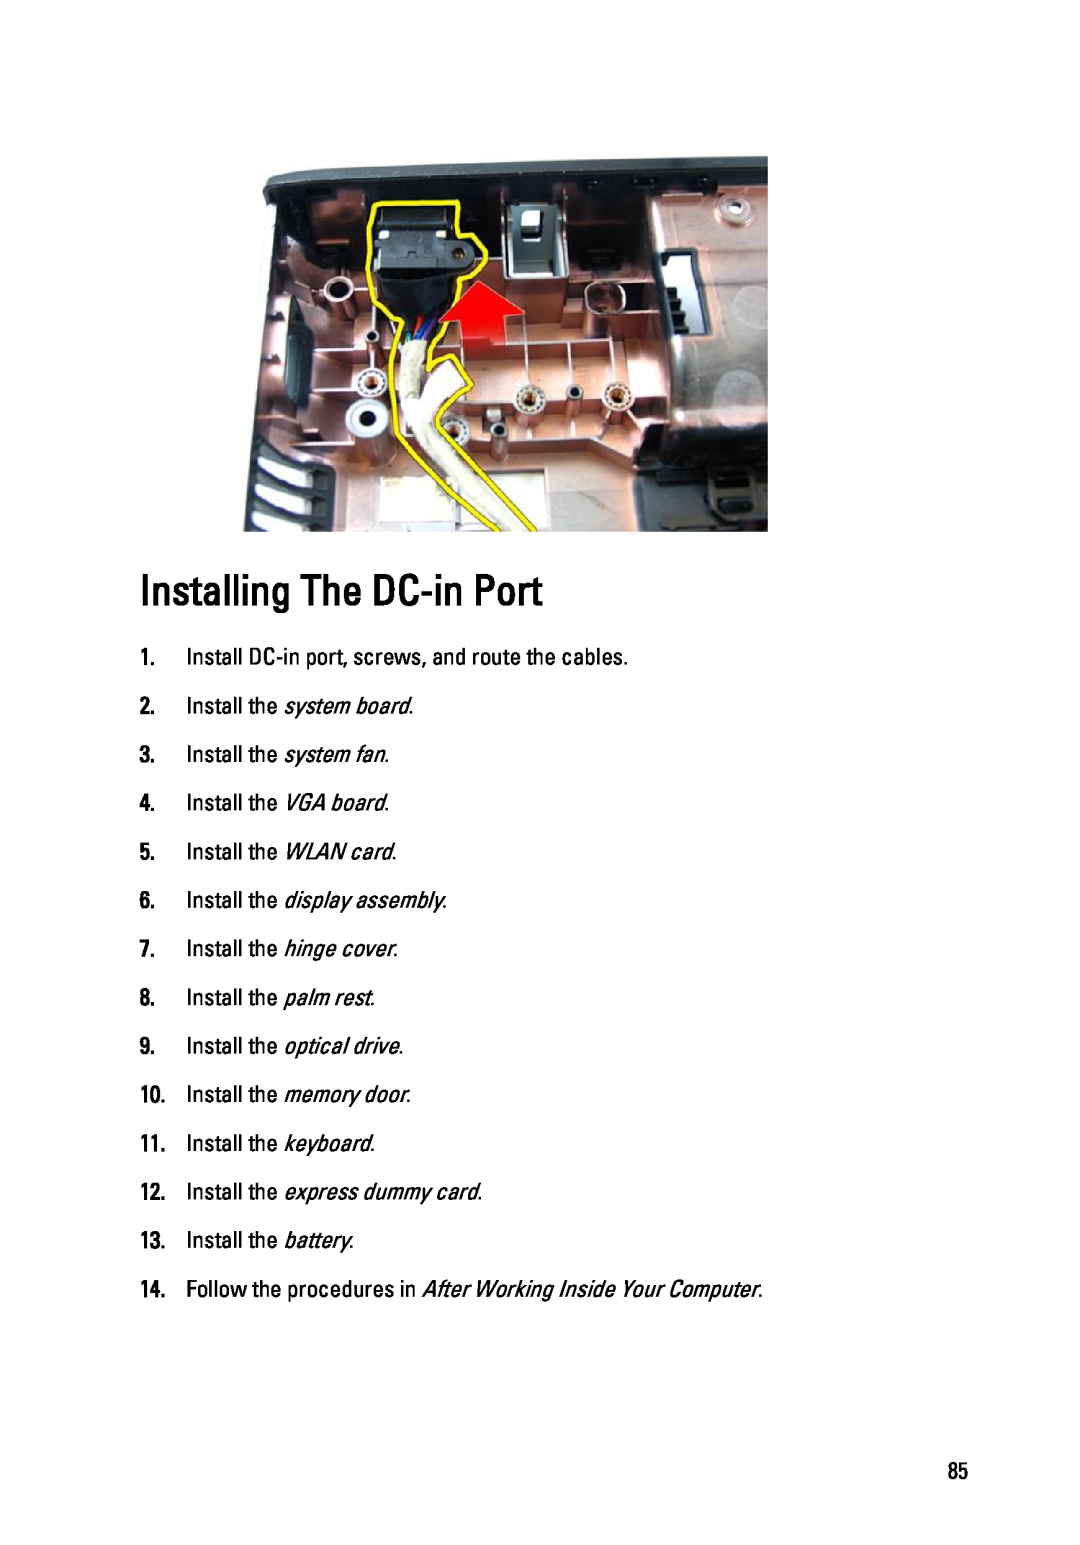 Dell 3450 owner manual Installing The DC-in Port, Install the display assembly, Install the express dummy card 